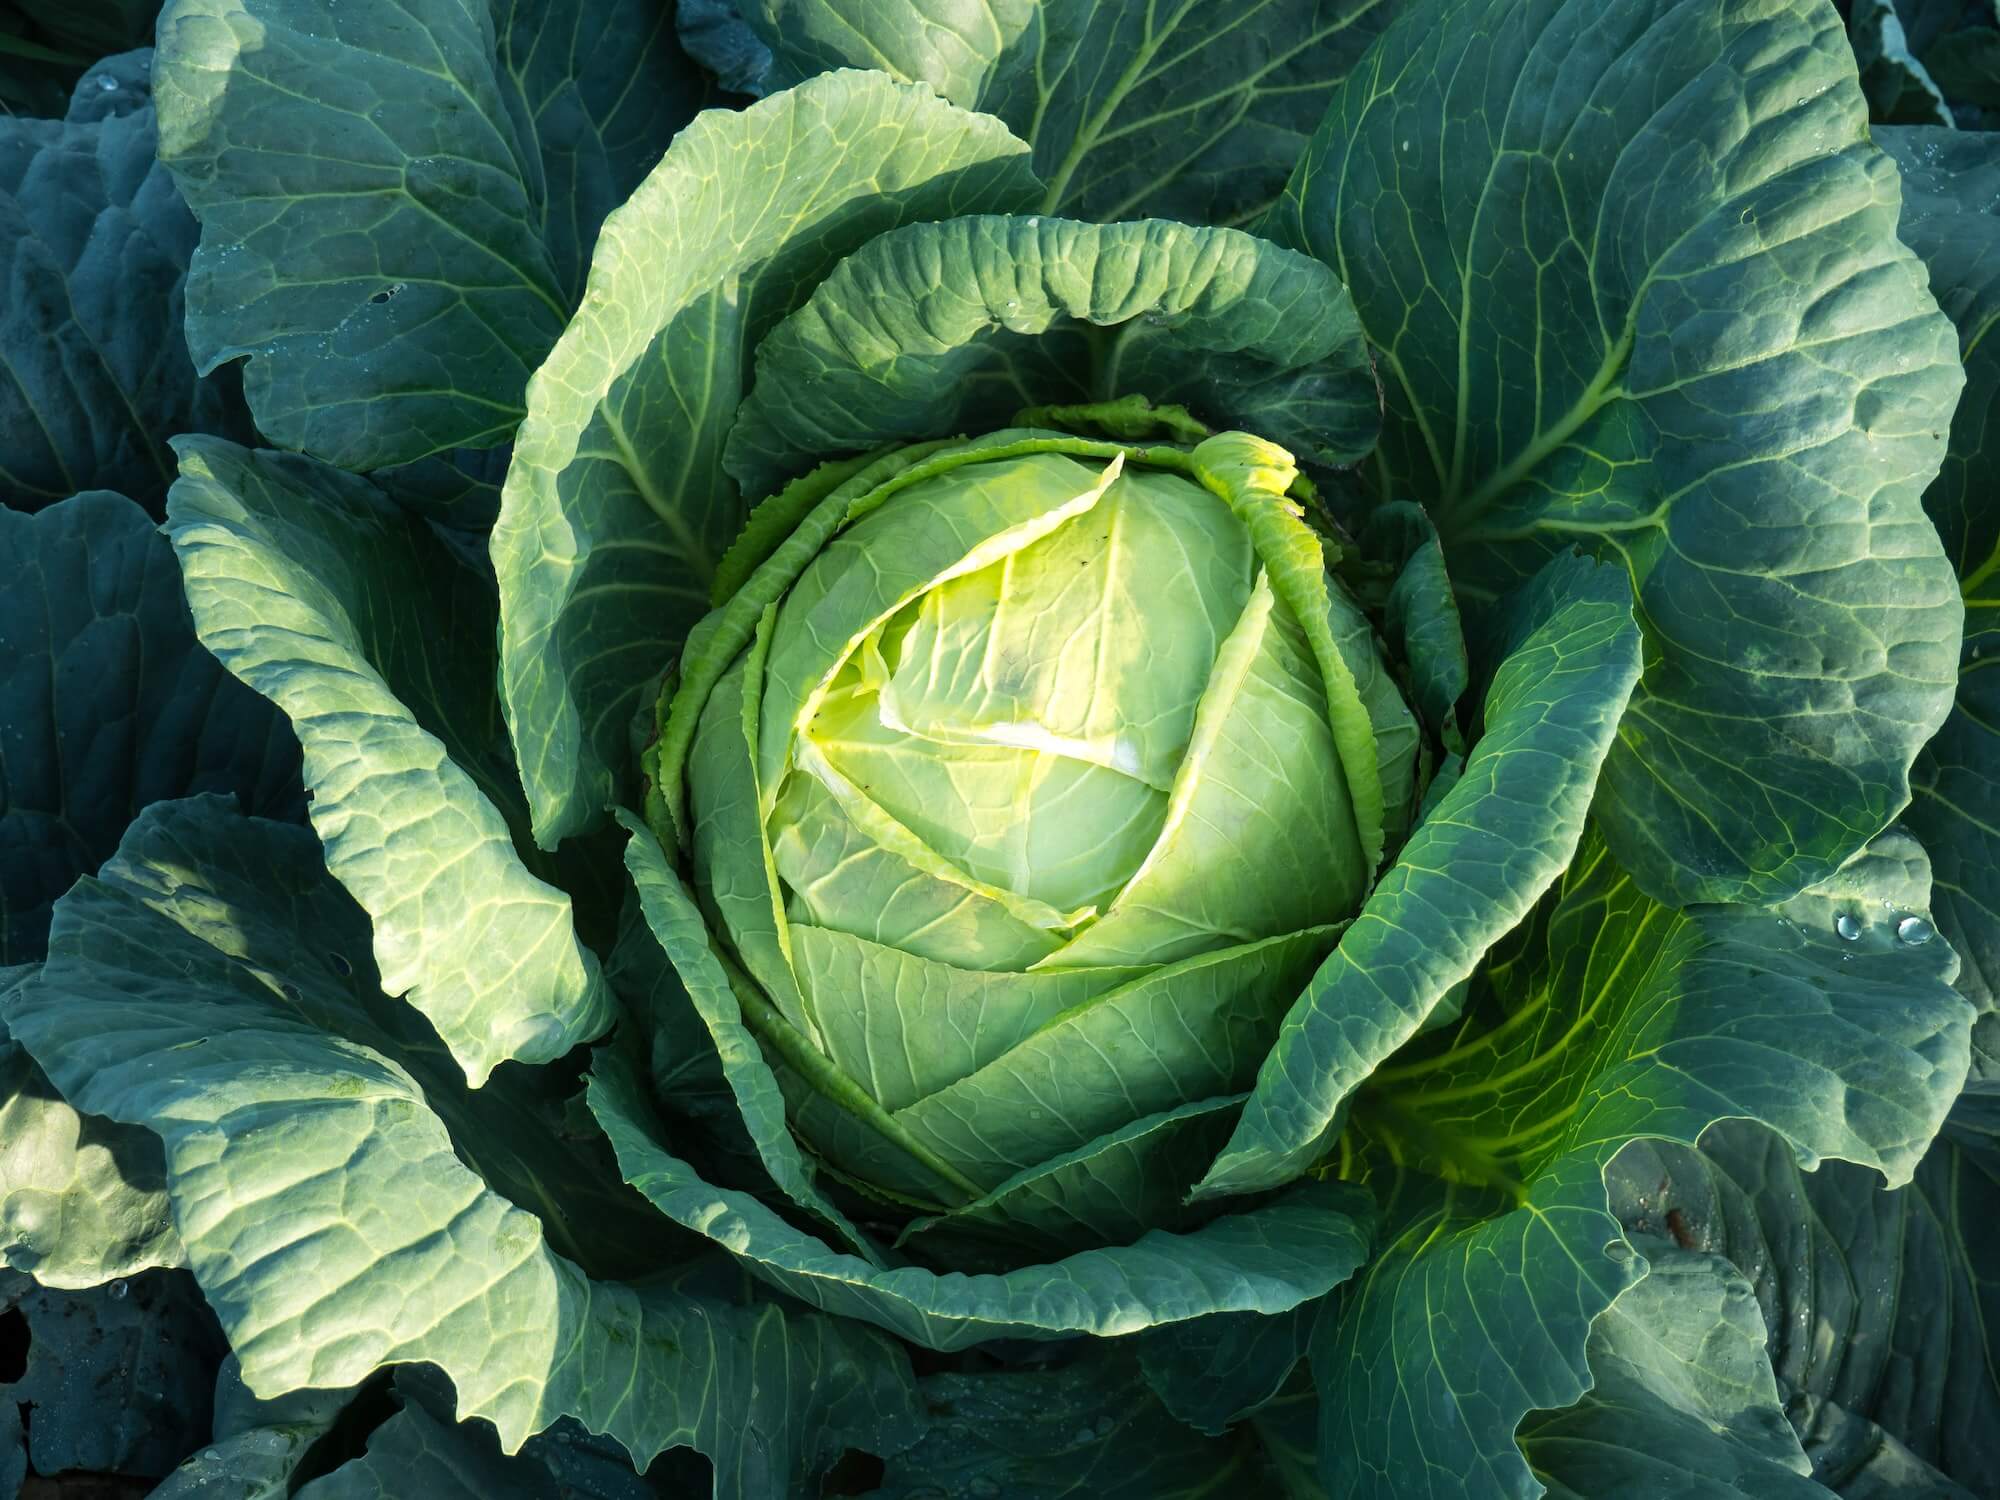 Cabbage seeds grown into full cabbage in field